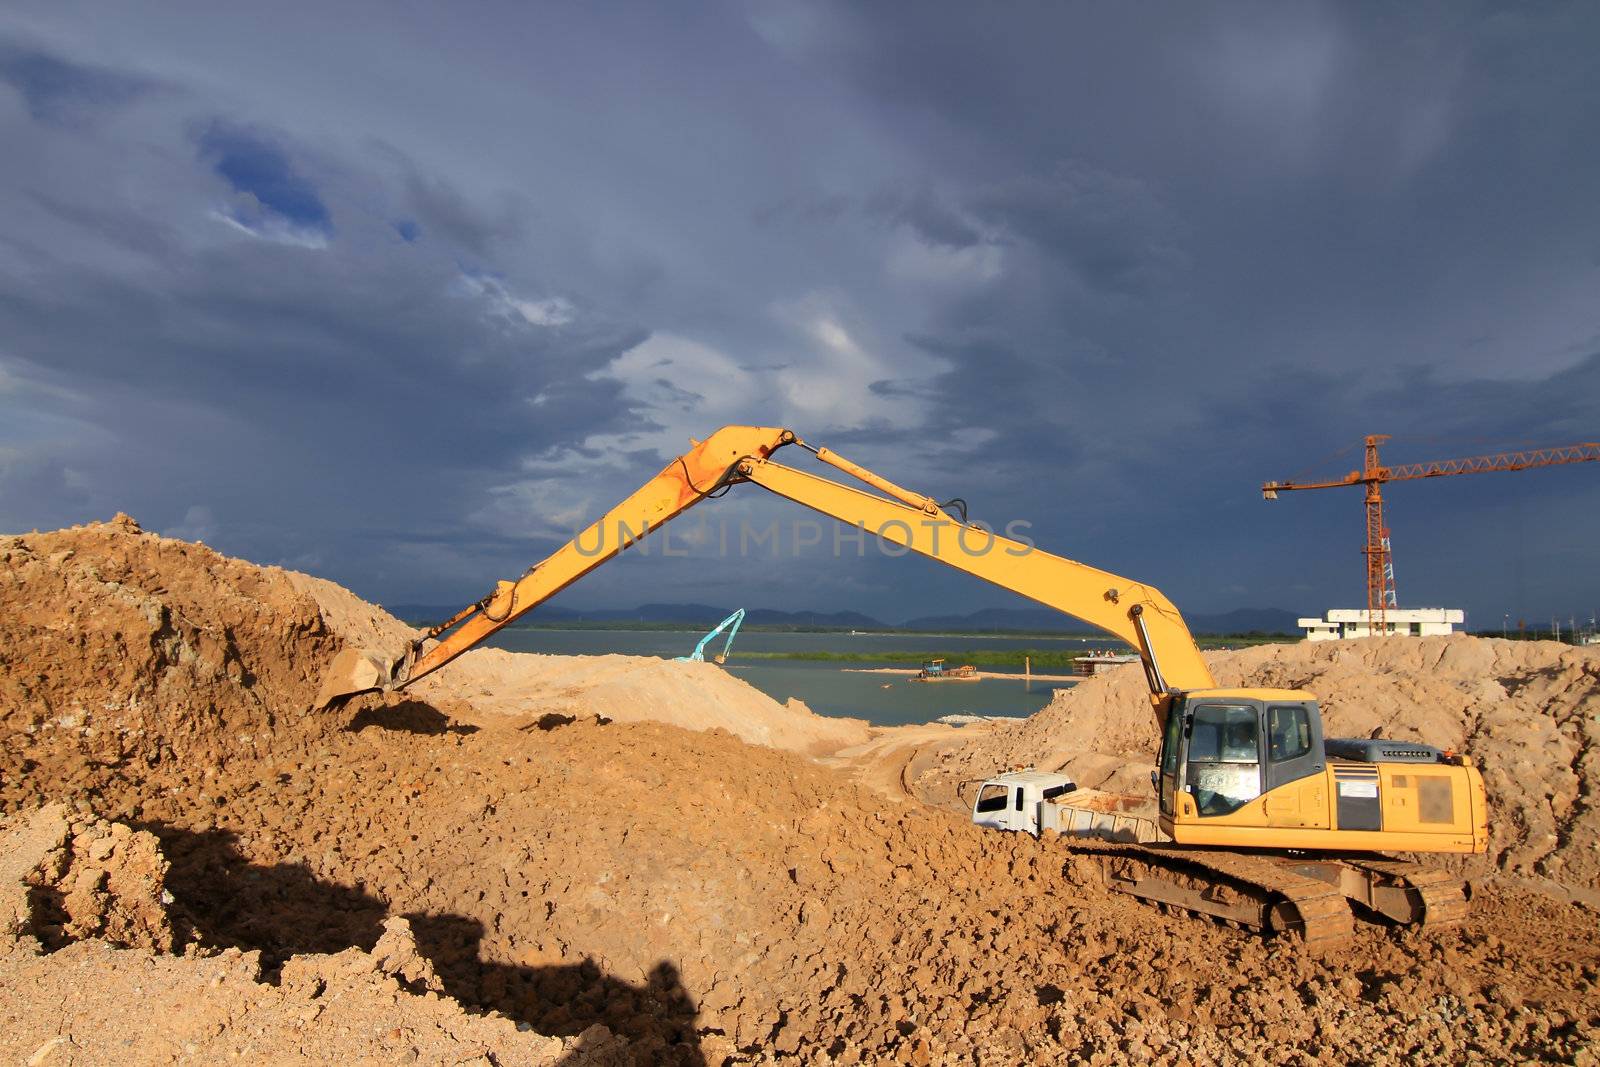 excavator loader machine during earthmoving works outdoors at construction site